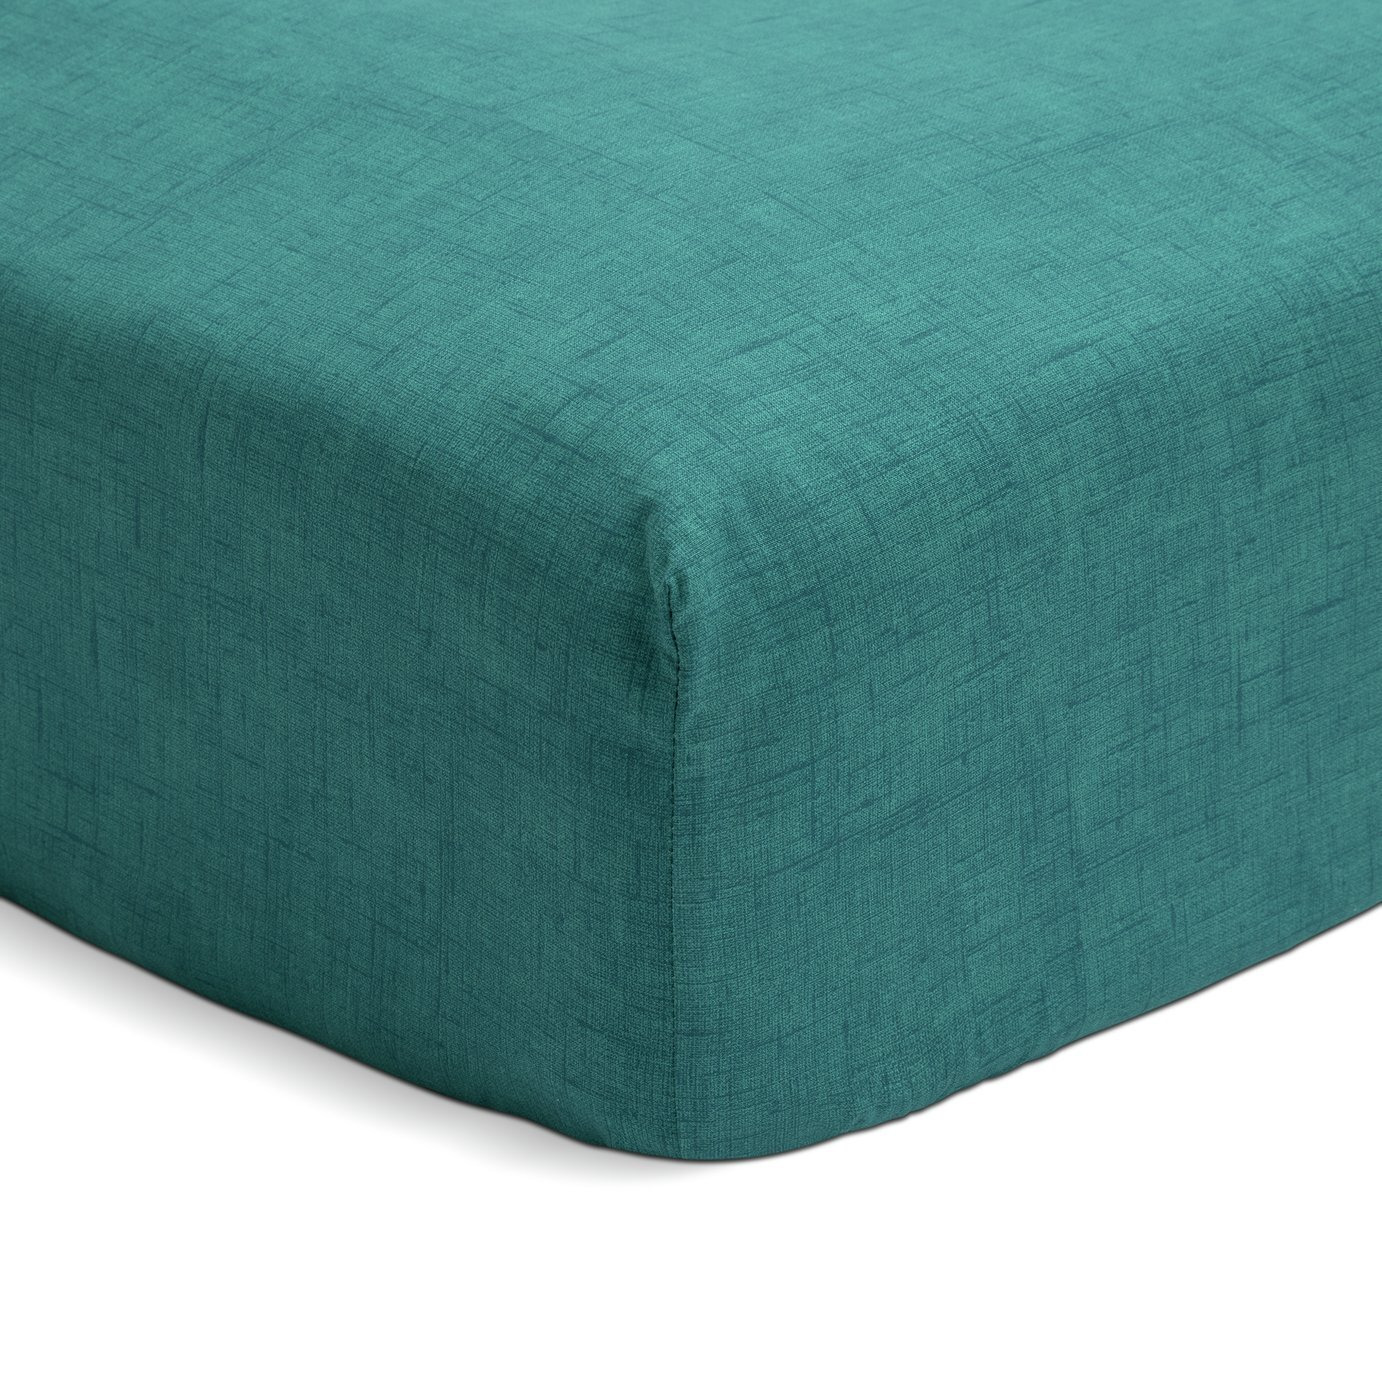 Habitat Texture Printed Teal Fitted Sheet - Double - image 1